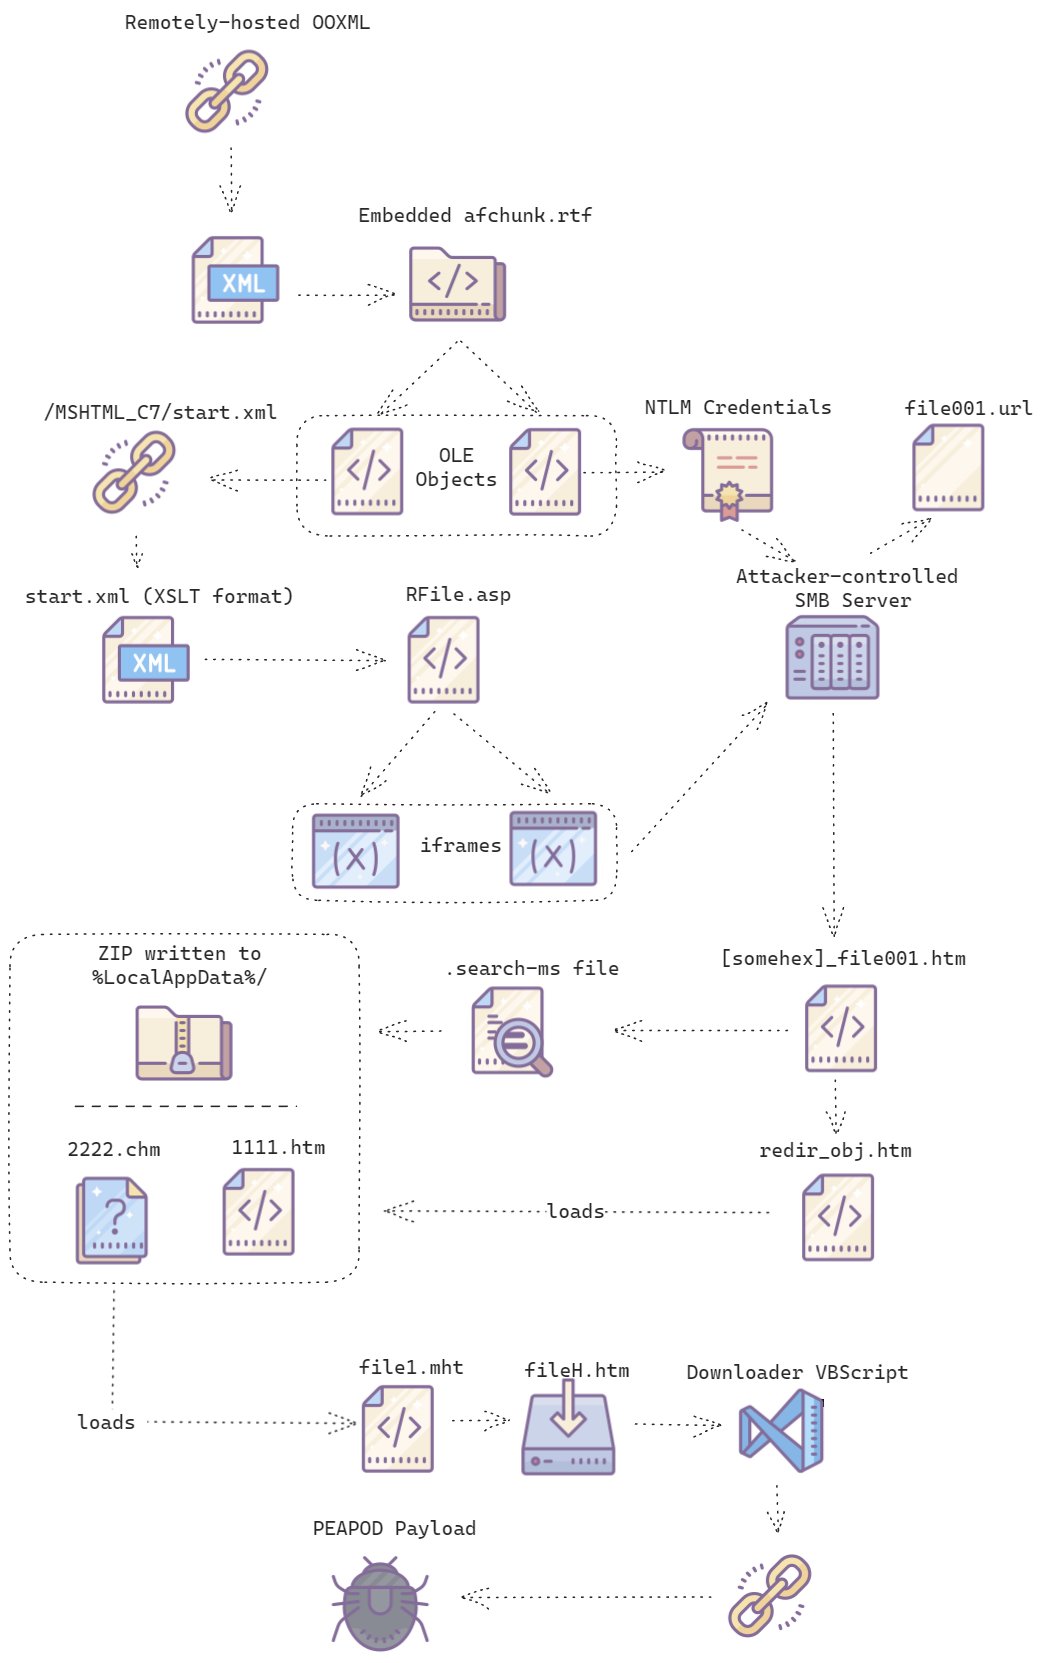 Image 7 is a flow chart of the exploit chain. It starts with a link to the remotely hosted OOXML. It continues through many layers until eventually the downloader VBScript is acquired.